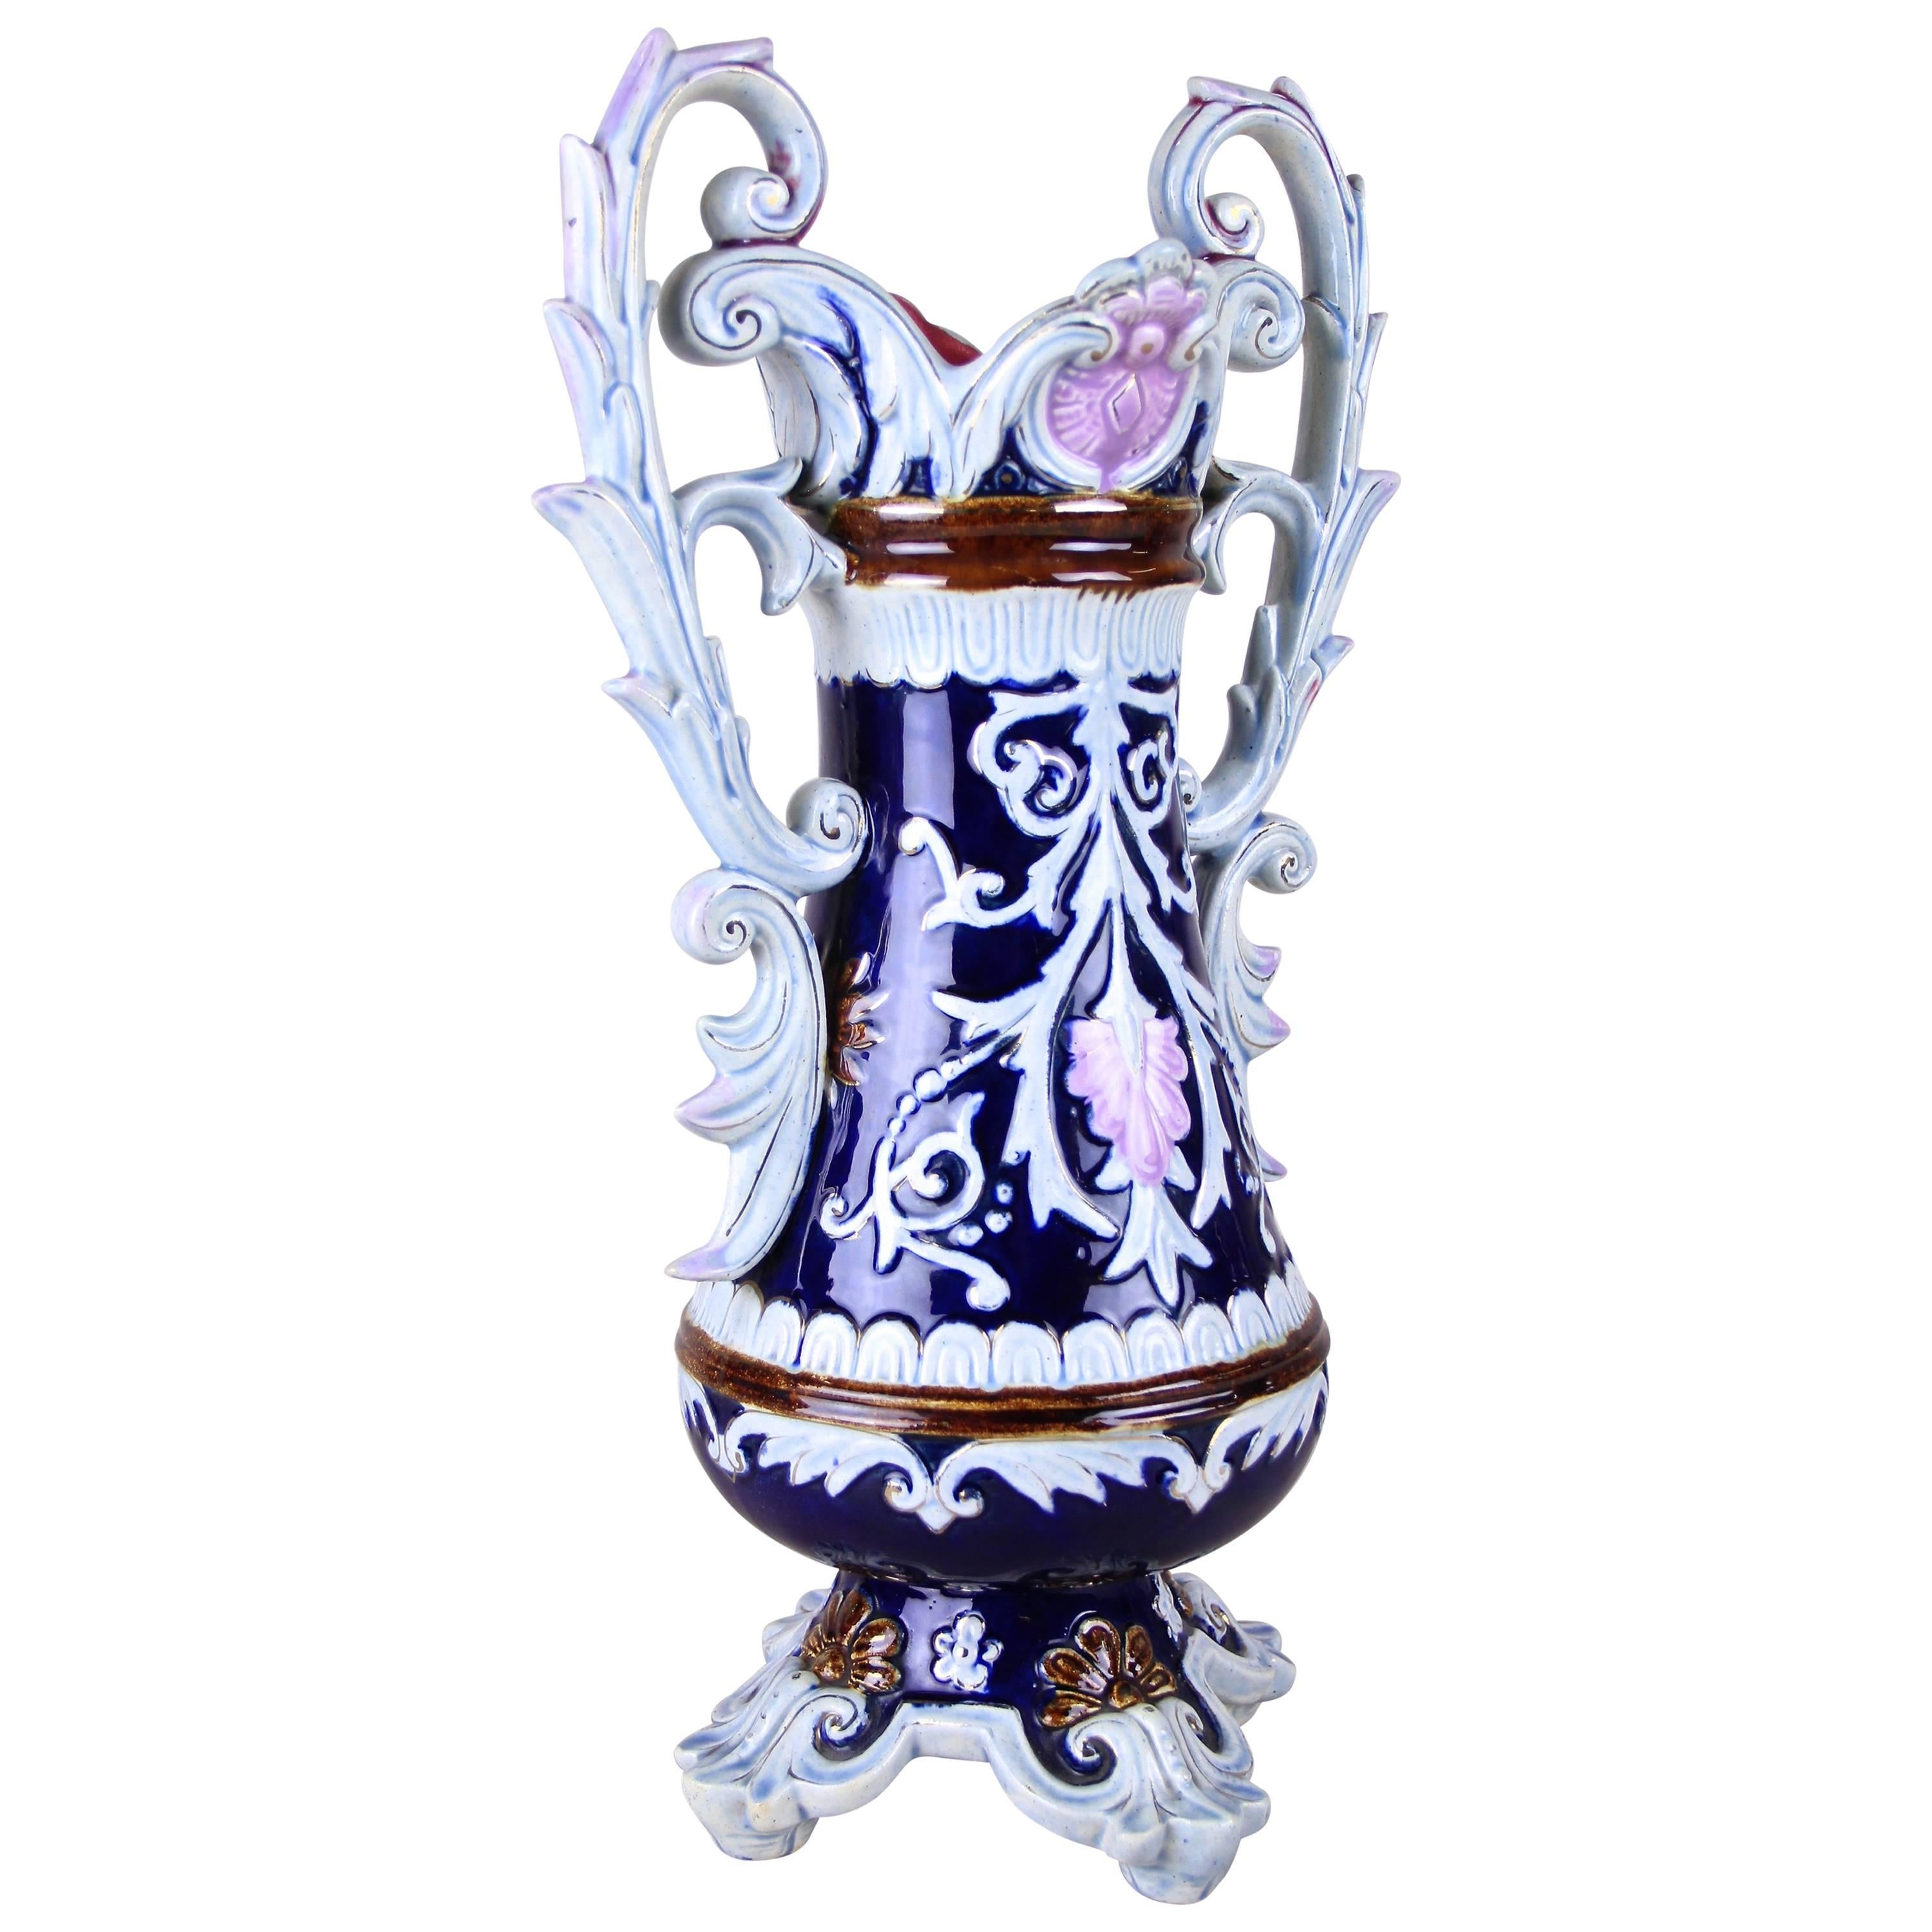 One of a kind Majolica vase from the so-called 